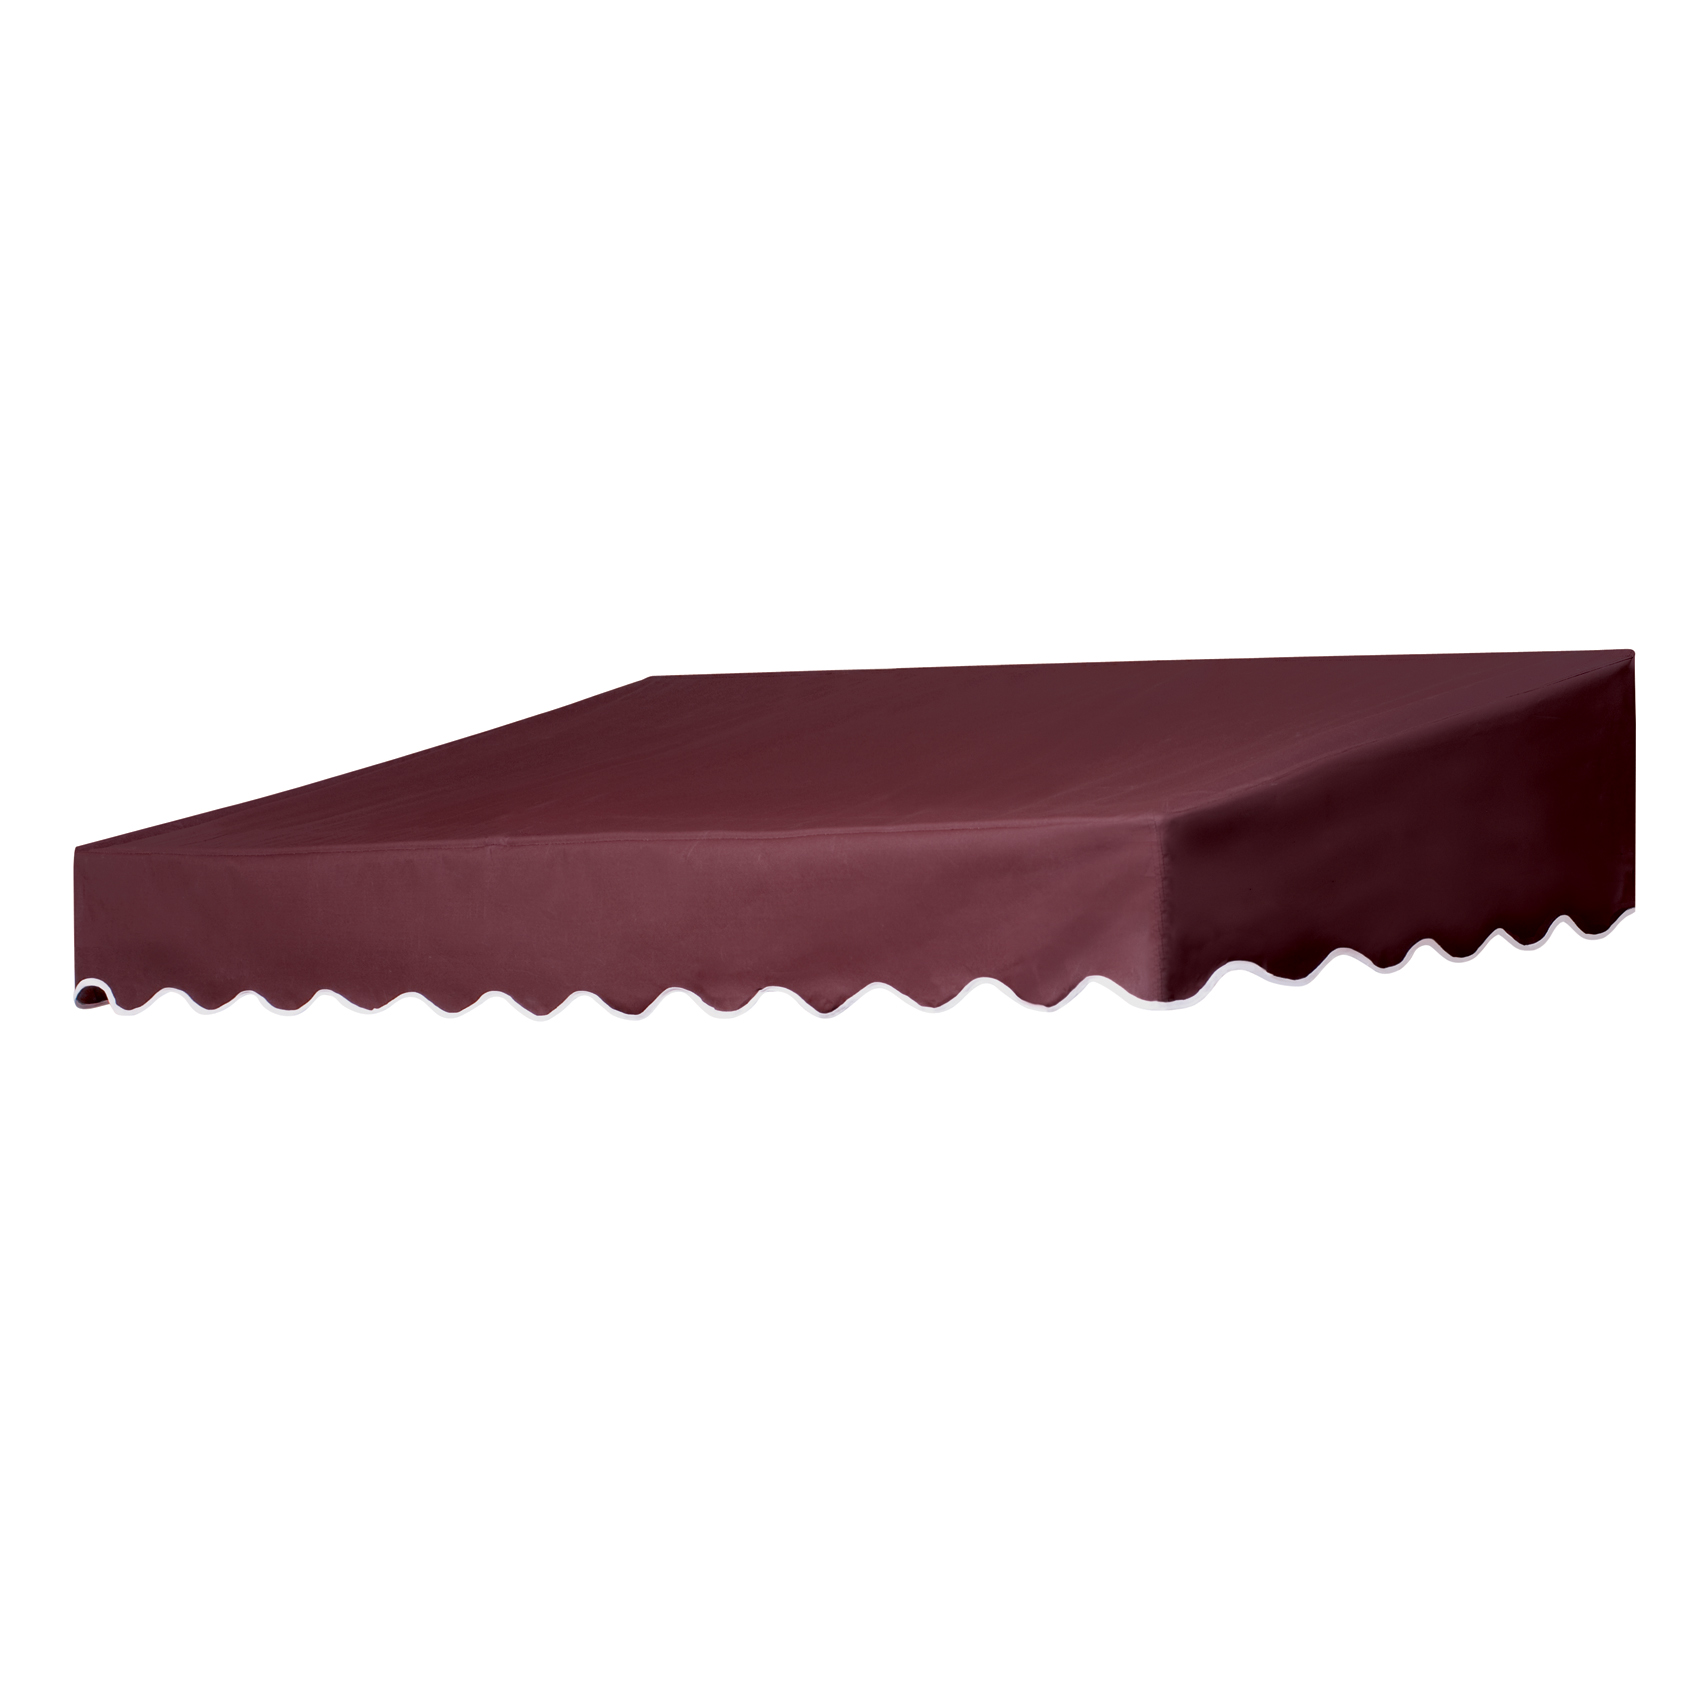 Door Canopy in a Box&reg; 6' Traditional Style Door Canopy Replacement Cover in Assorted Colors